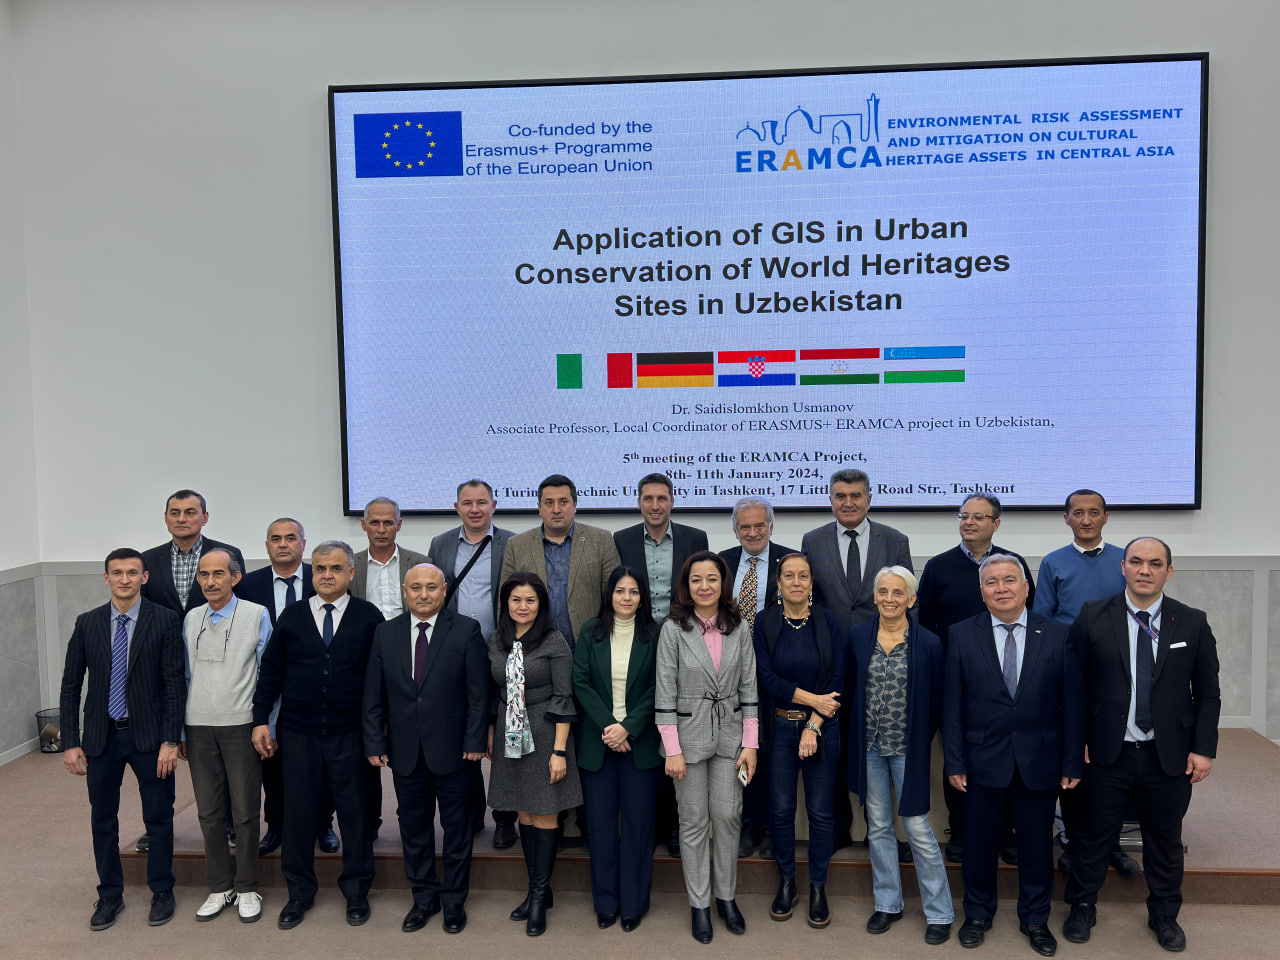 You are currently viewing The 5th meeting of the ERAMCA project and the Final Workshop were convened from January 7 to 11 of 2024 at Turin Polytechnic University in Tashkent (TTPU)